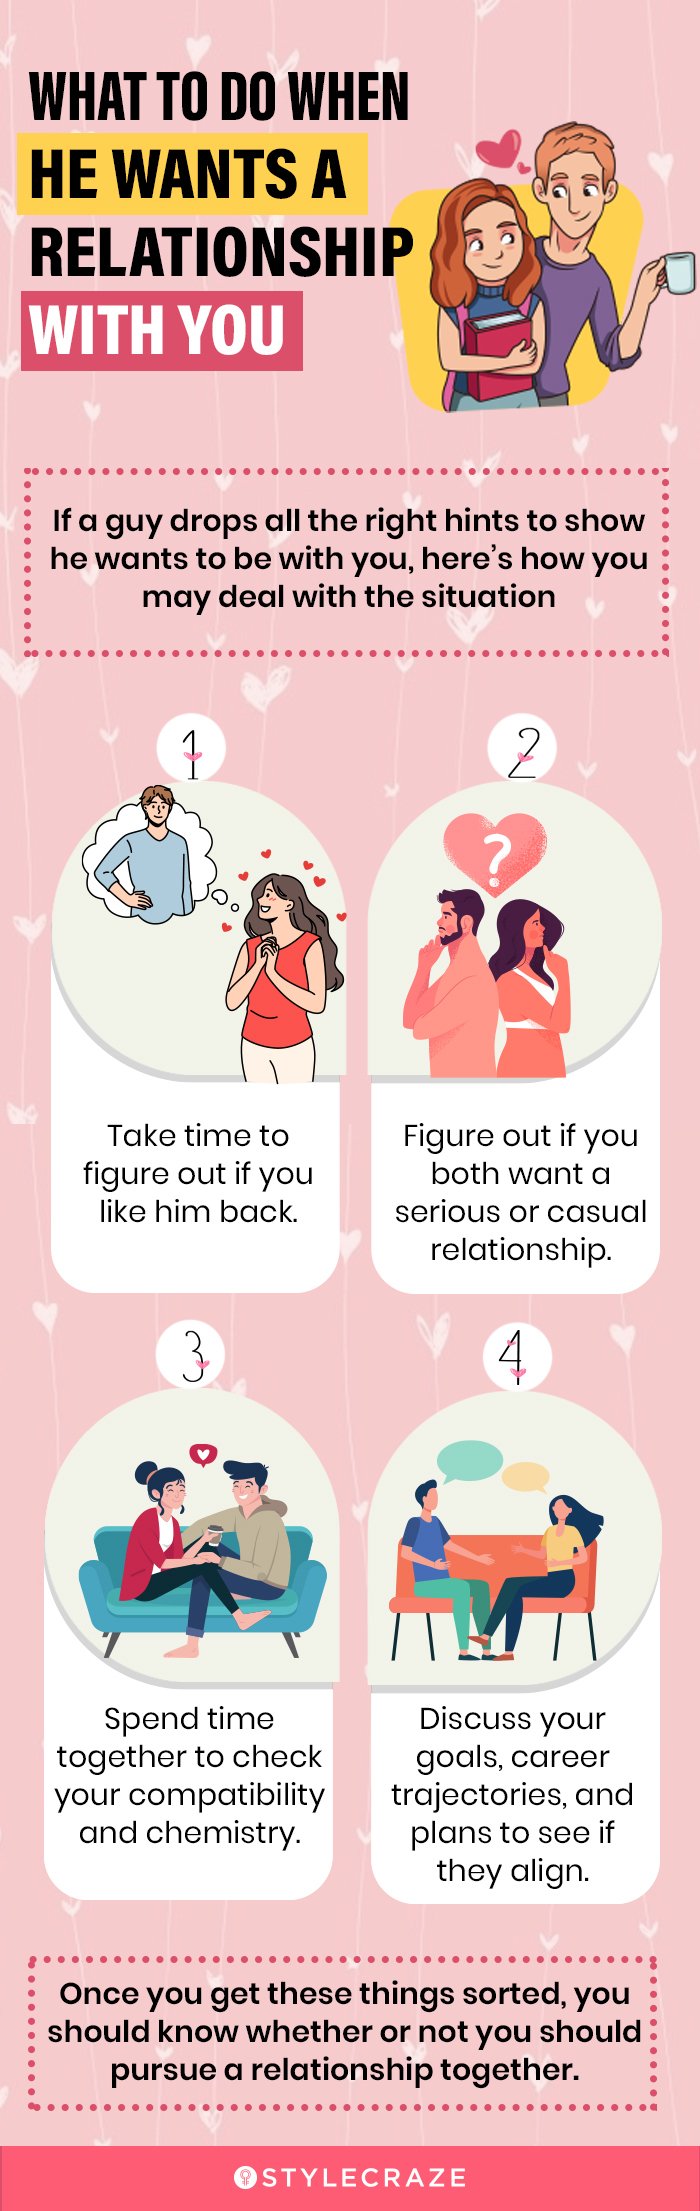 what to do when he wants a relationship with you (infographic)